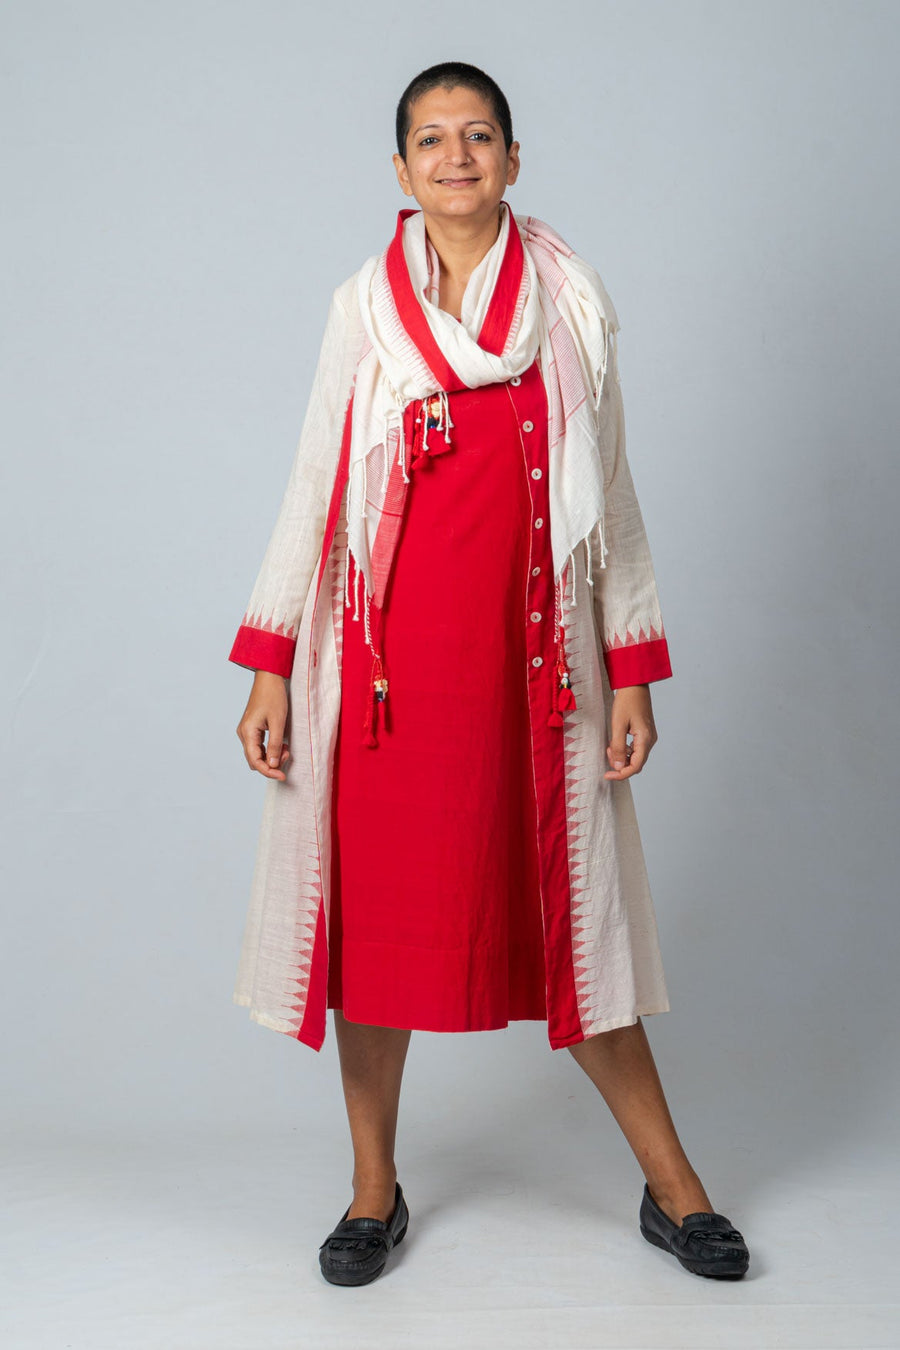 Red Temple Border Jacket with Organic Cotton Dress and Scarf Accessory - EREWANI SET